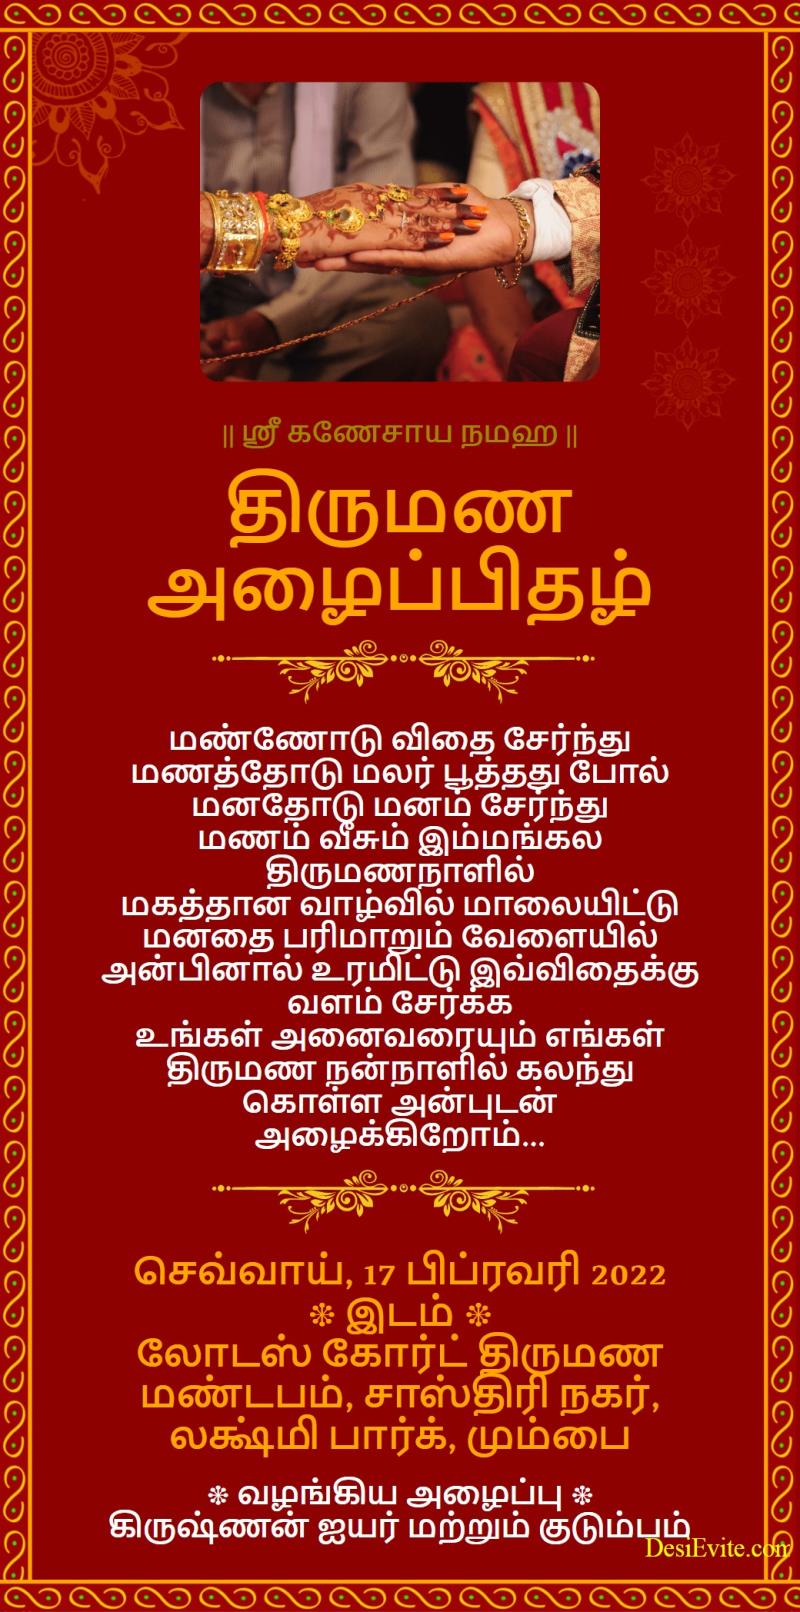 Tamil traditional wedding ecard red background with border 84